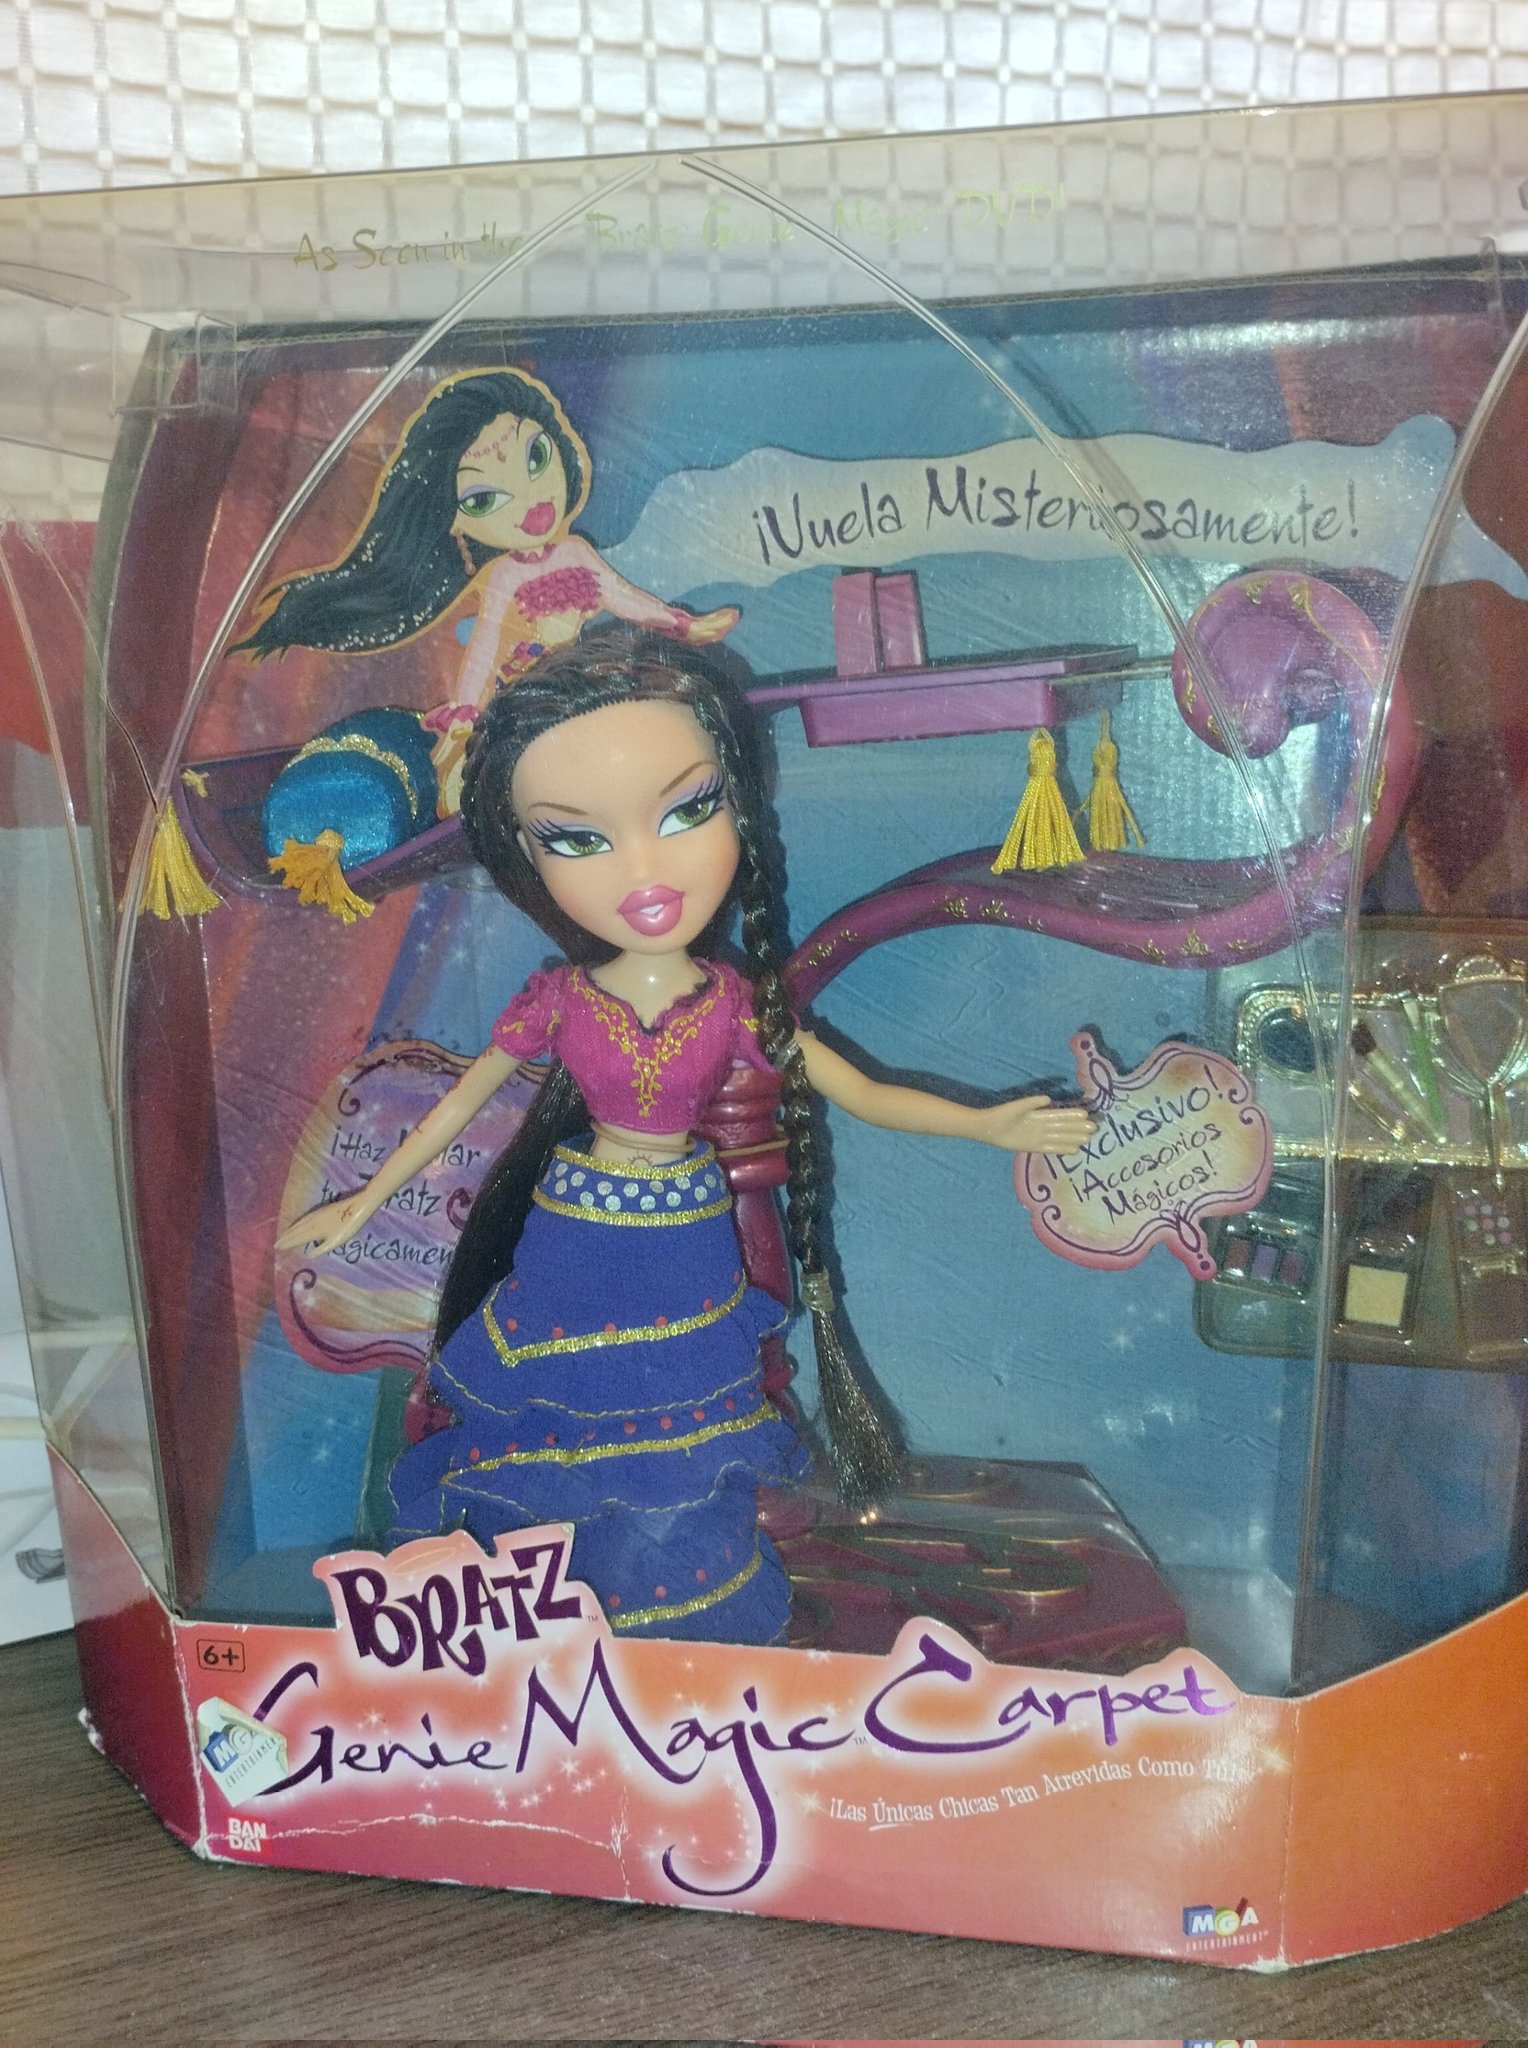 Chico Muñeca™ on X: Just got the Bratz Genie Magic Carpet with Katia  having Cloe's clothes in the mail does anyone knows anything?   / X